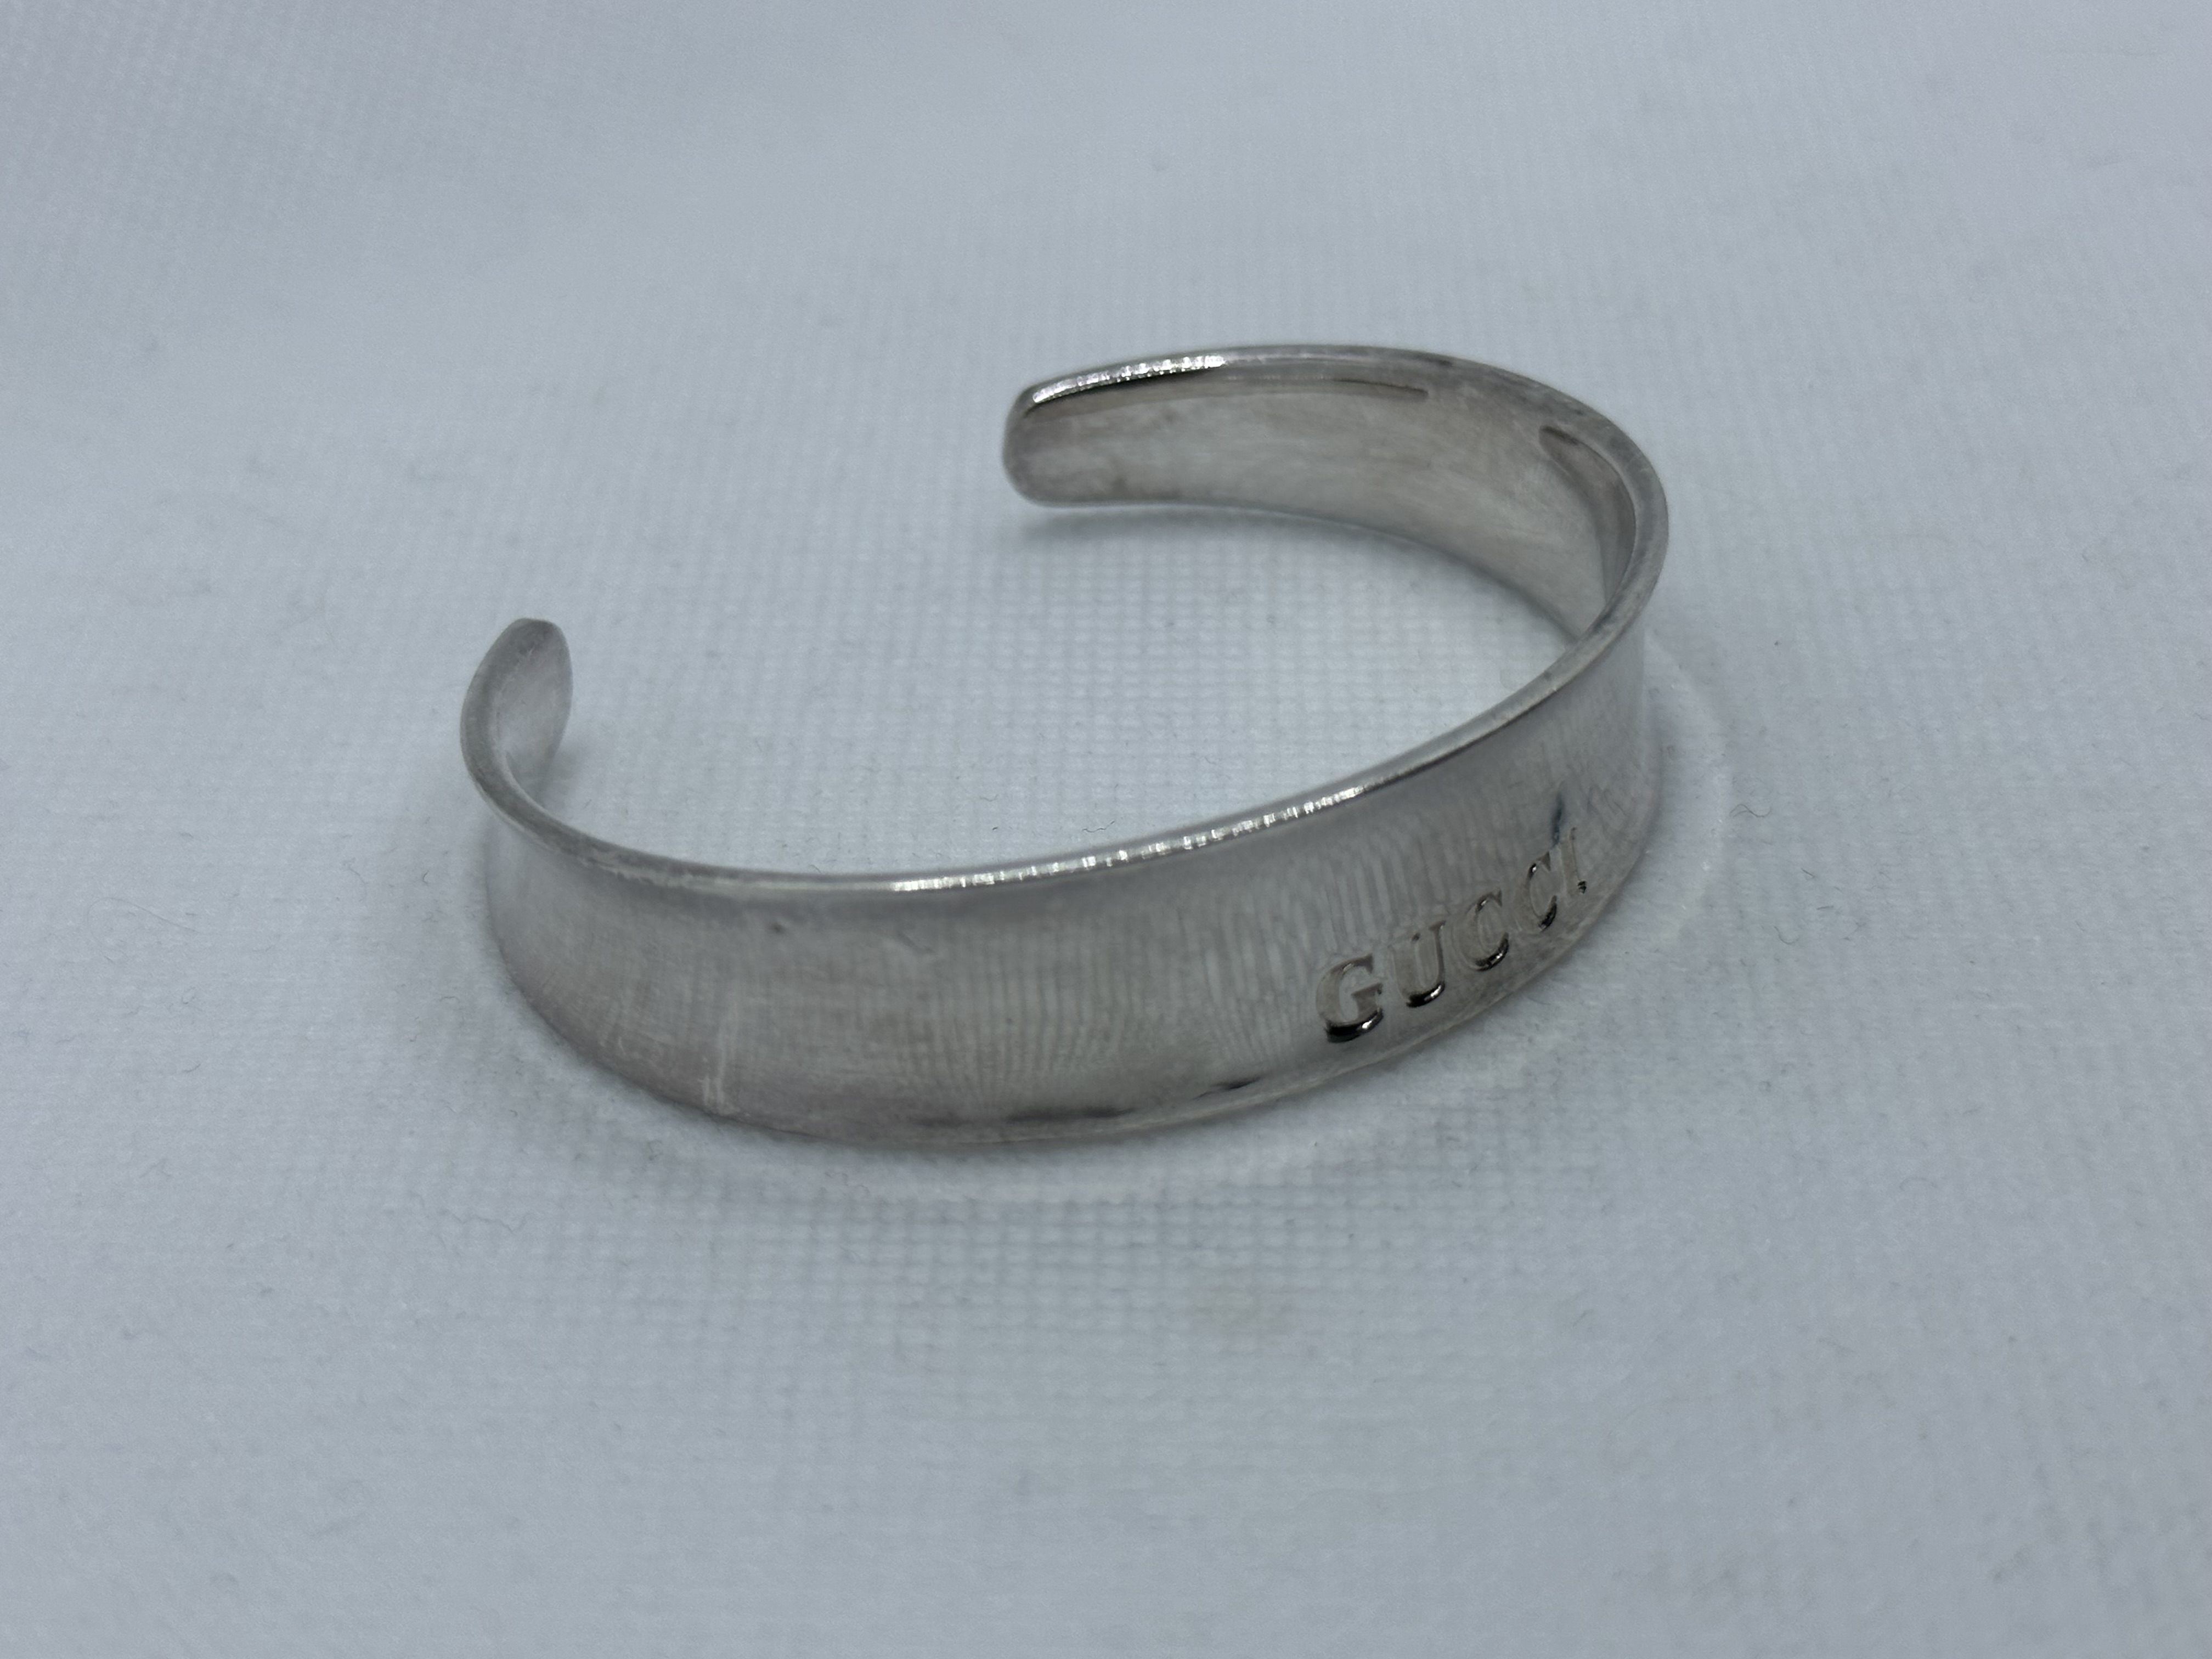 Gucci 925 Silver Made in Italy Cuff Bracelet Bangl - Image 3 of 9